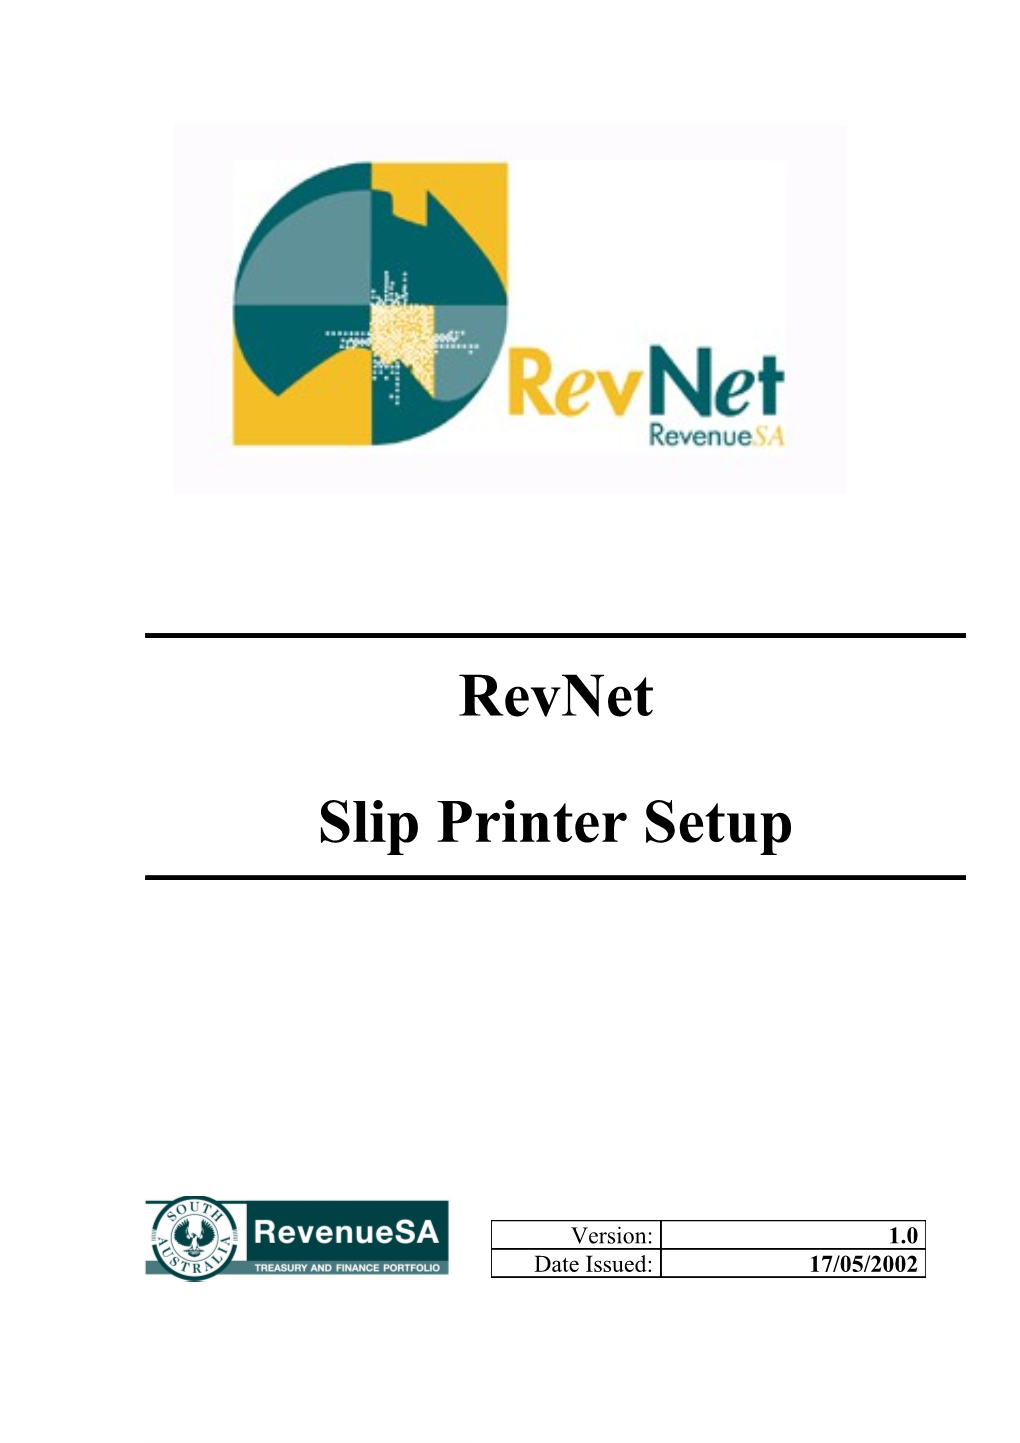 Either Open the Attached File (Revnet Slip Printer